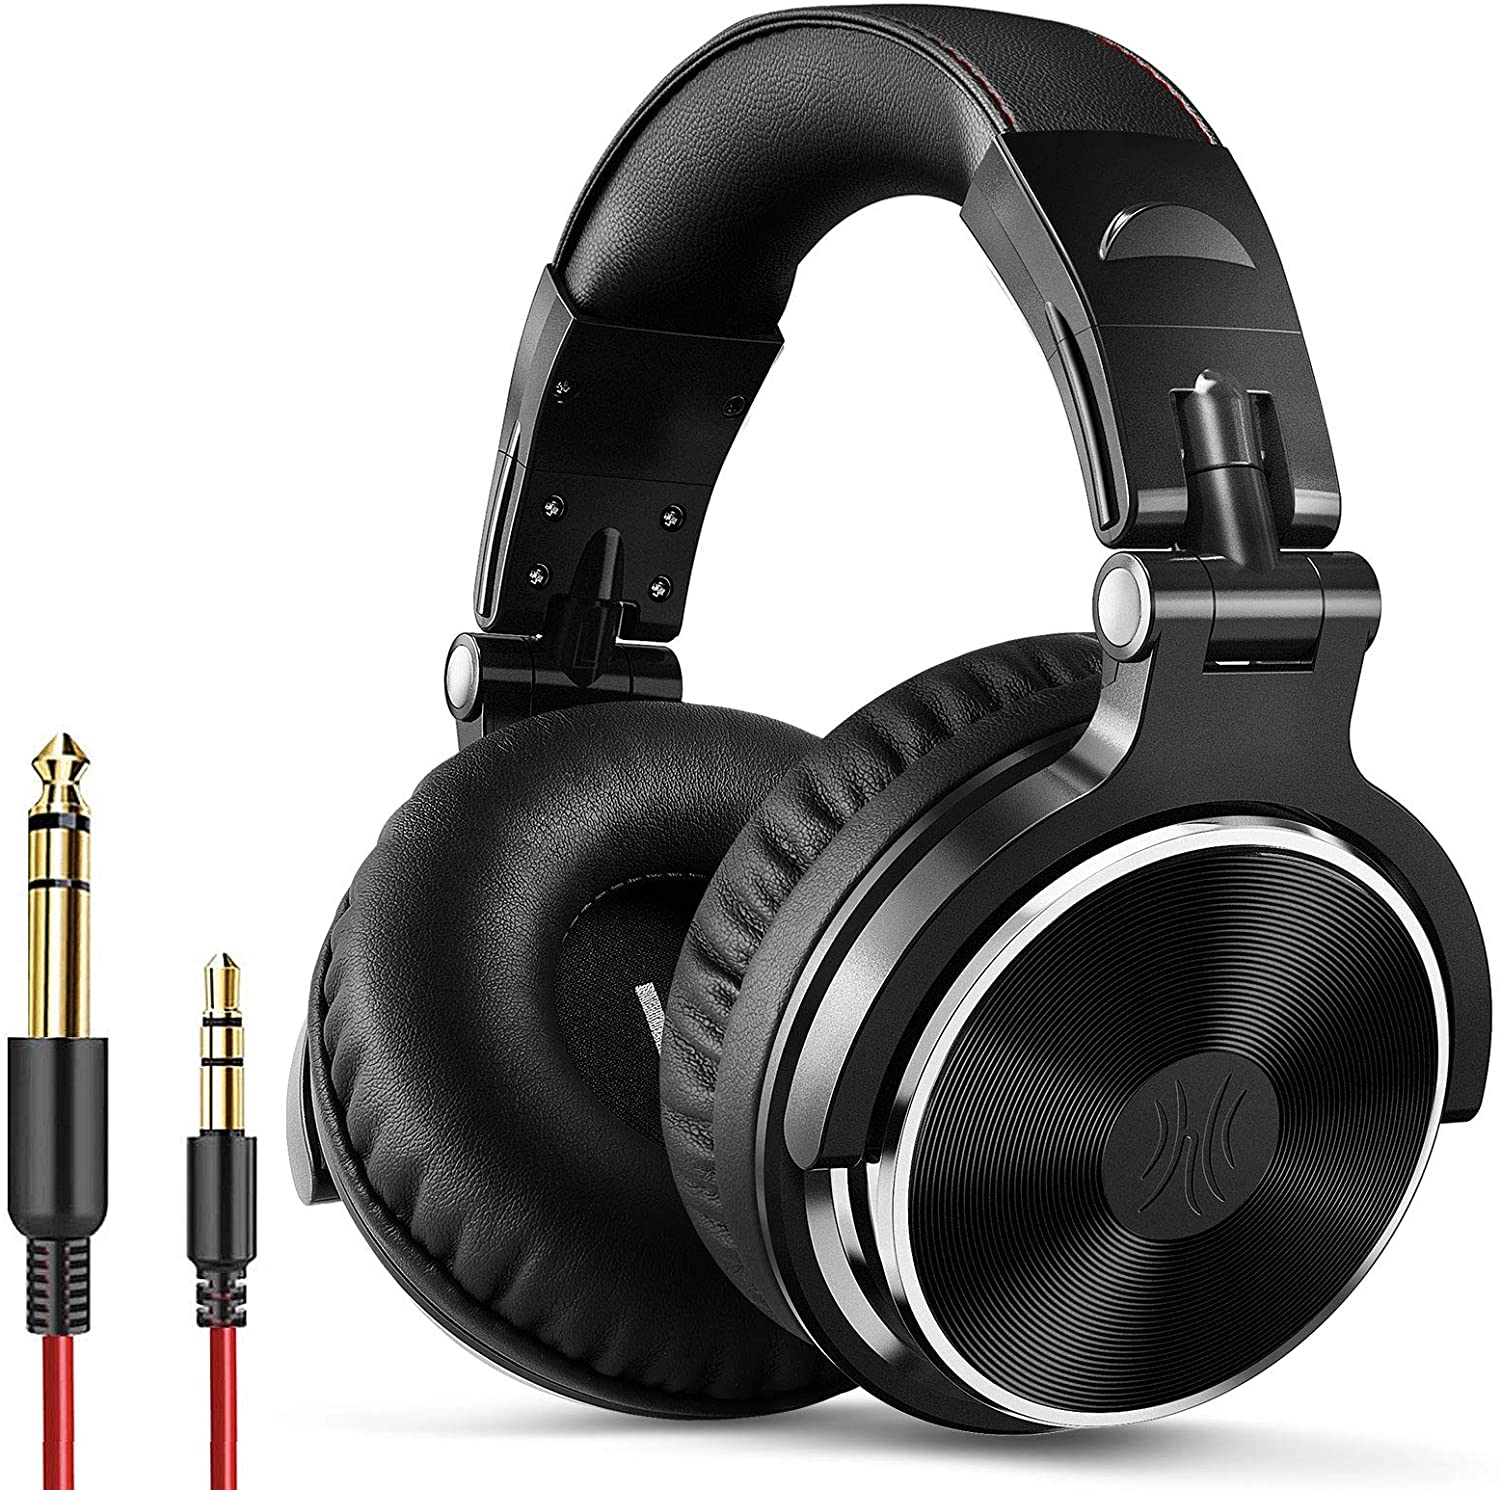 OneOdio Pro10 Headphones 'Black' at Bounce Online R0.00